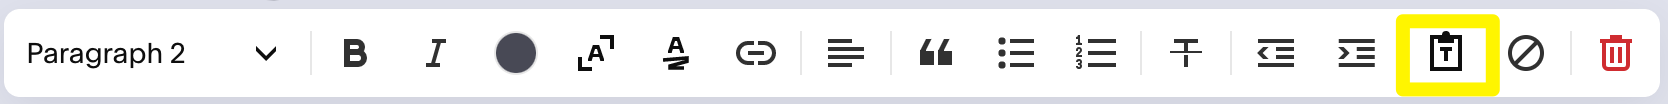 Paste_as_plain_text_icon_Squarespace_text_toolbar.png